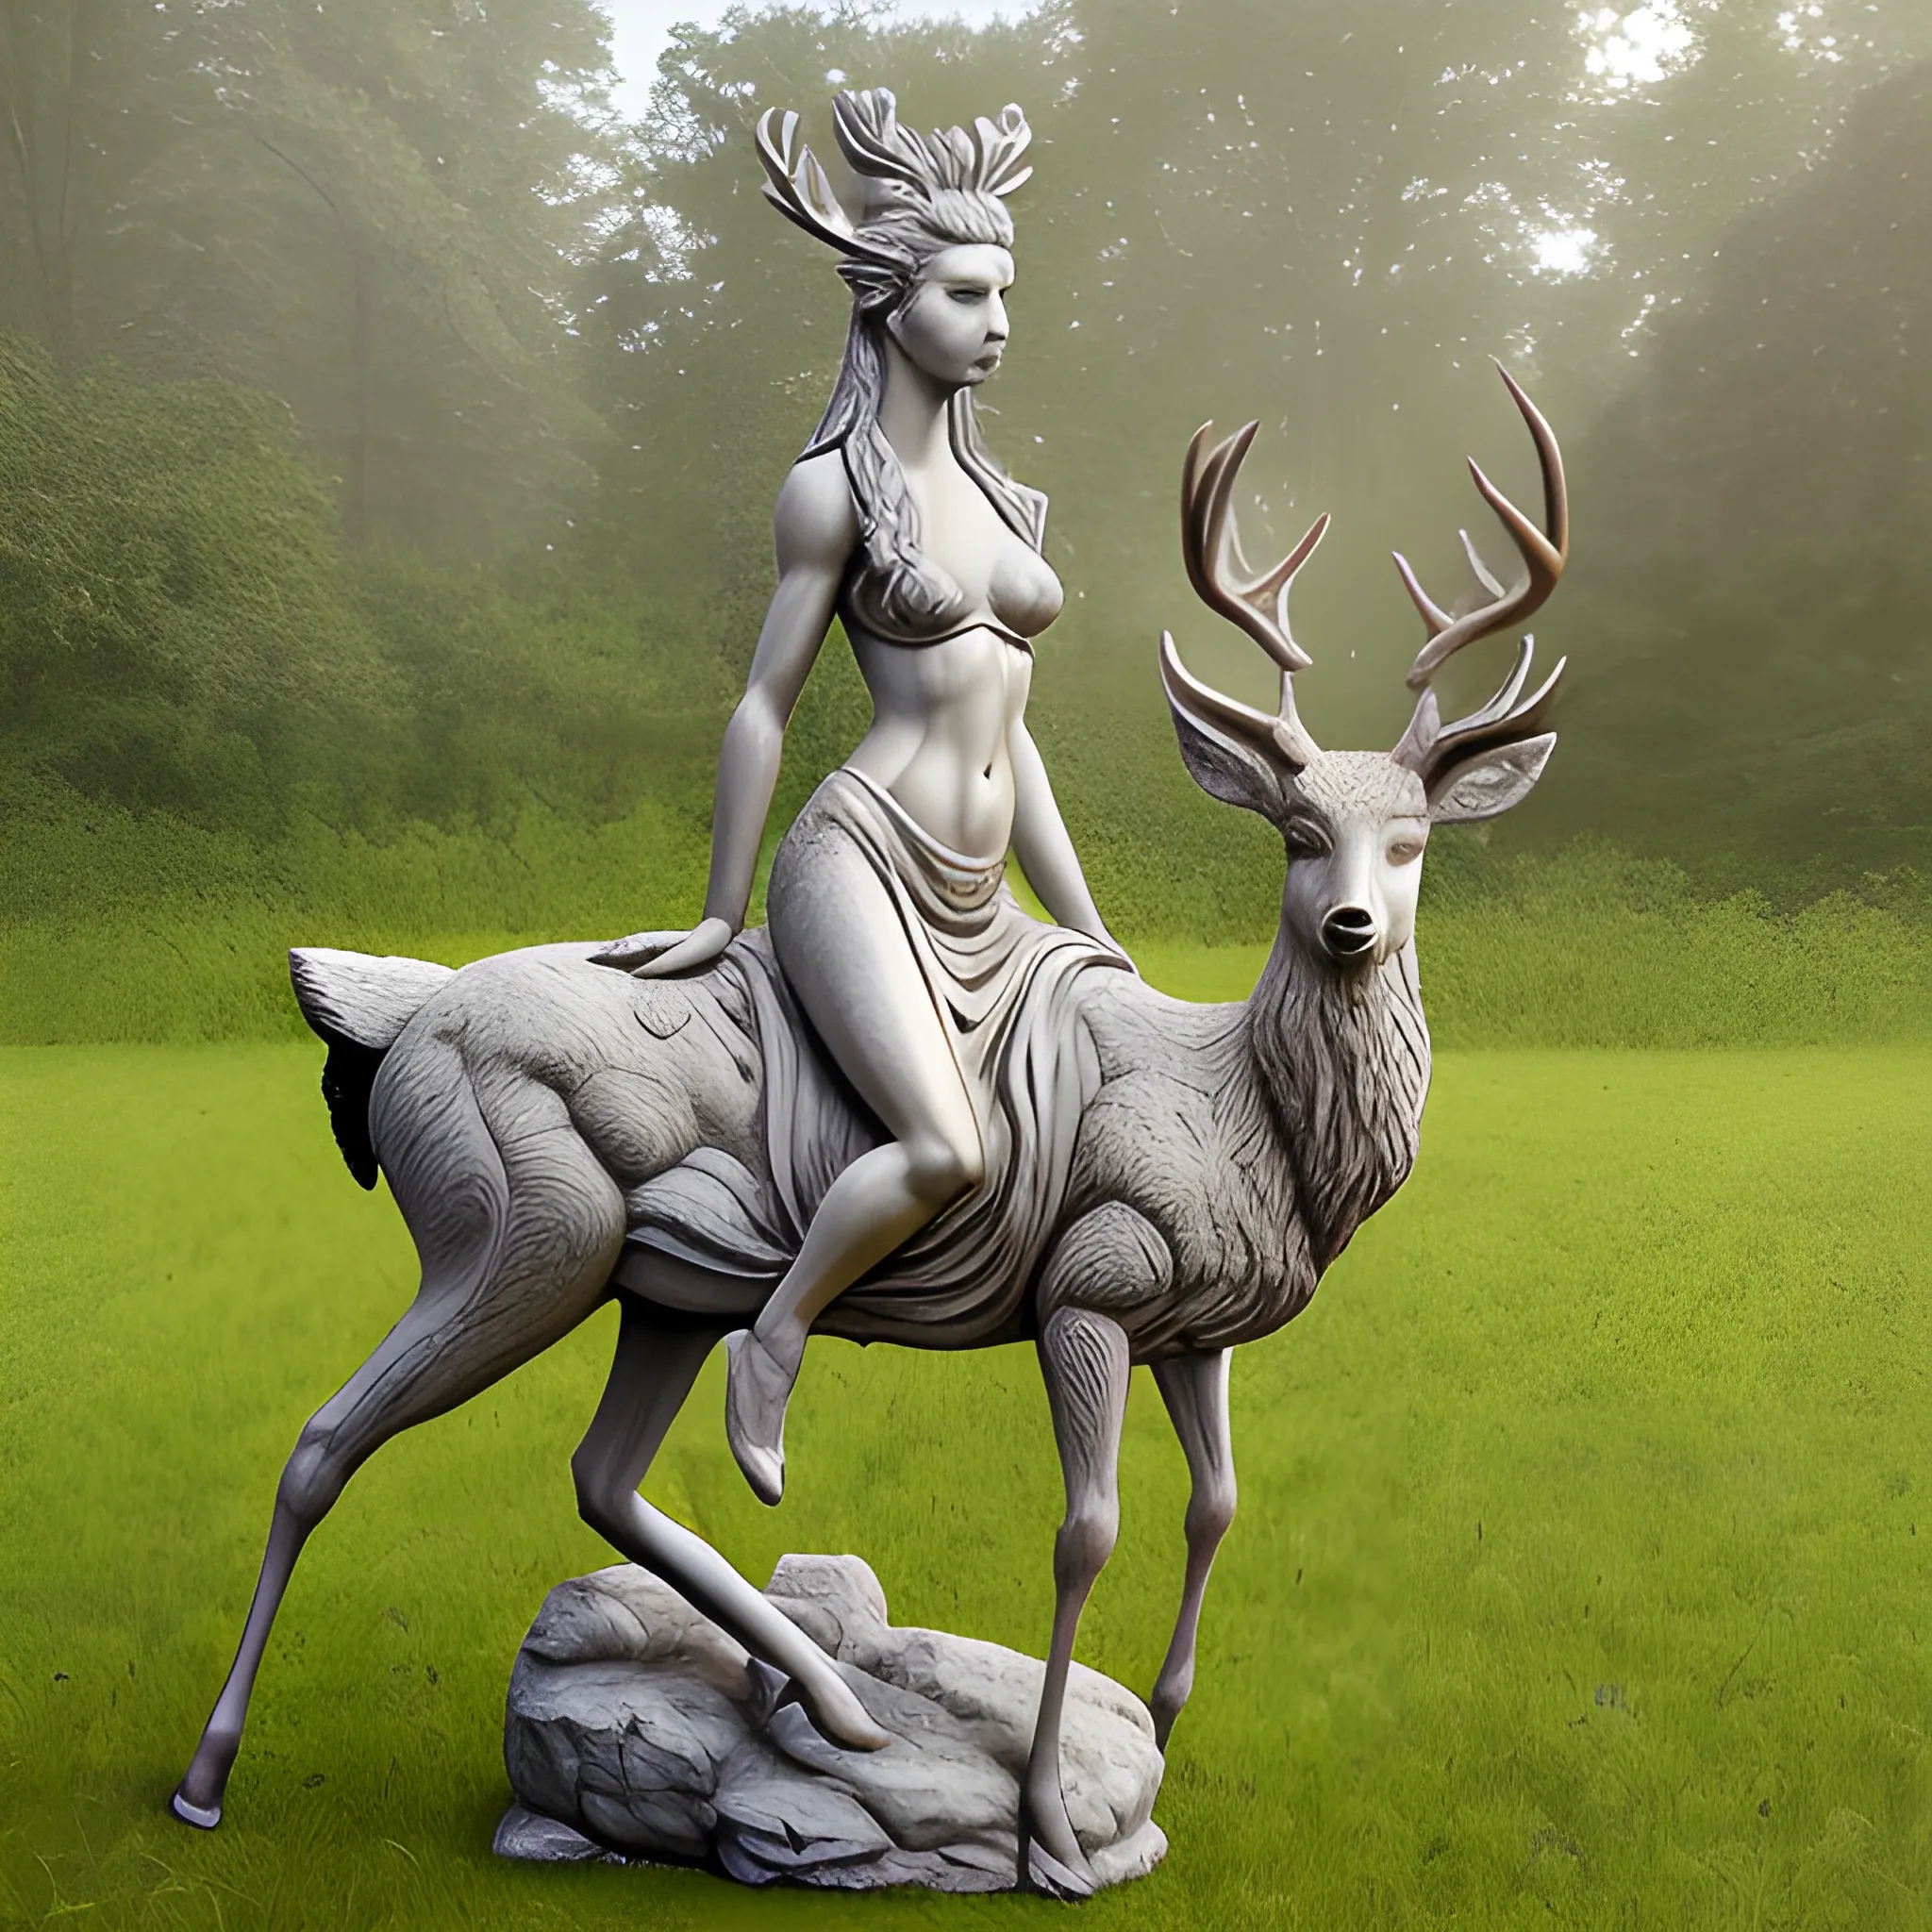 , Hyper realistic sculpture, beautiful female goddess of deer and plants, mounted on an animal mix of deer and horse. made by a genius modern sculptor in the 21st century, Pencil Sketch